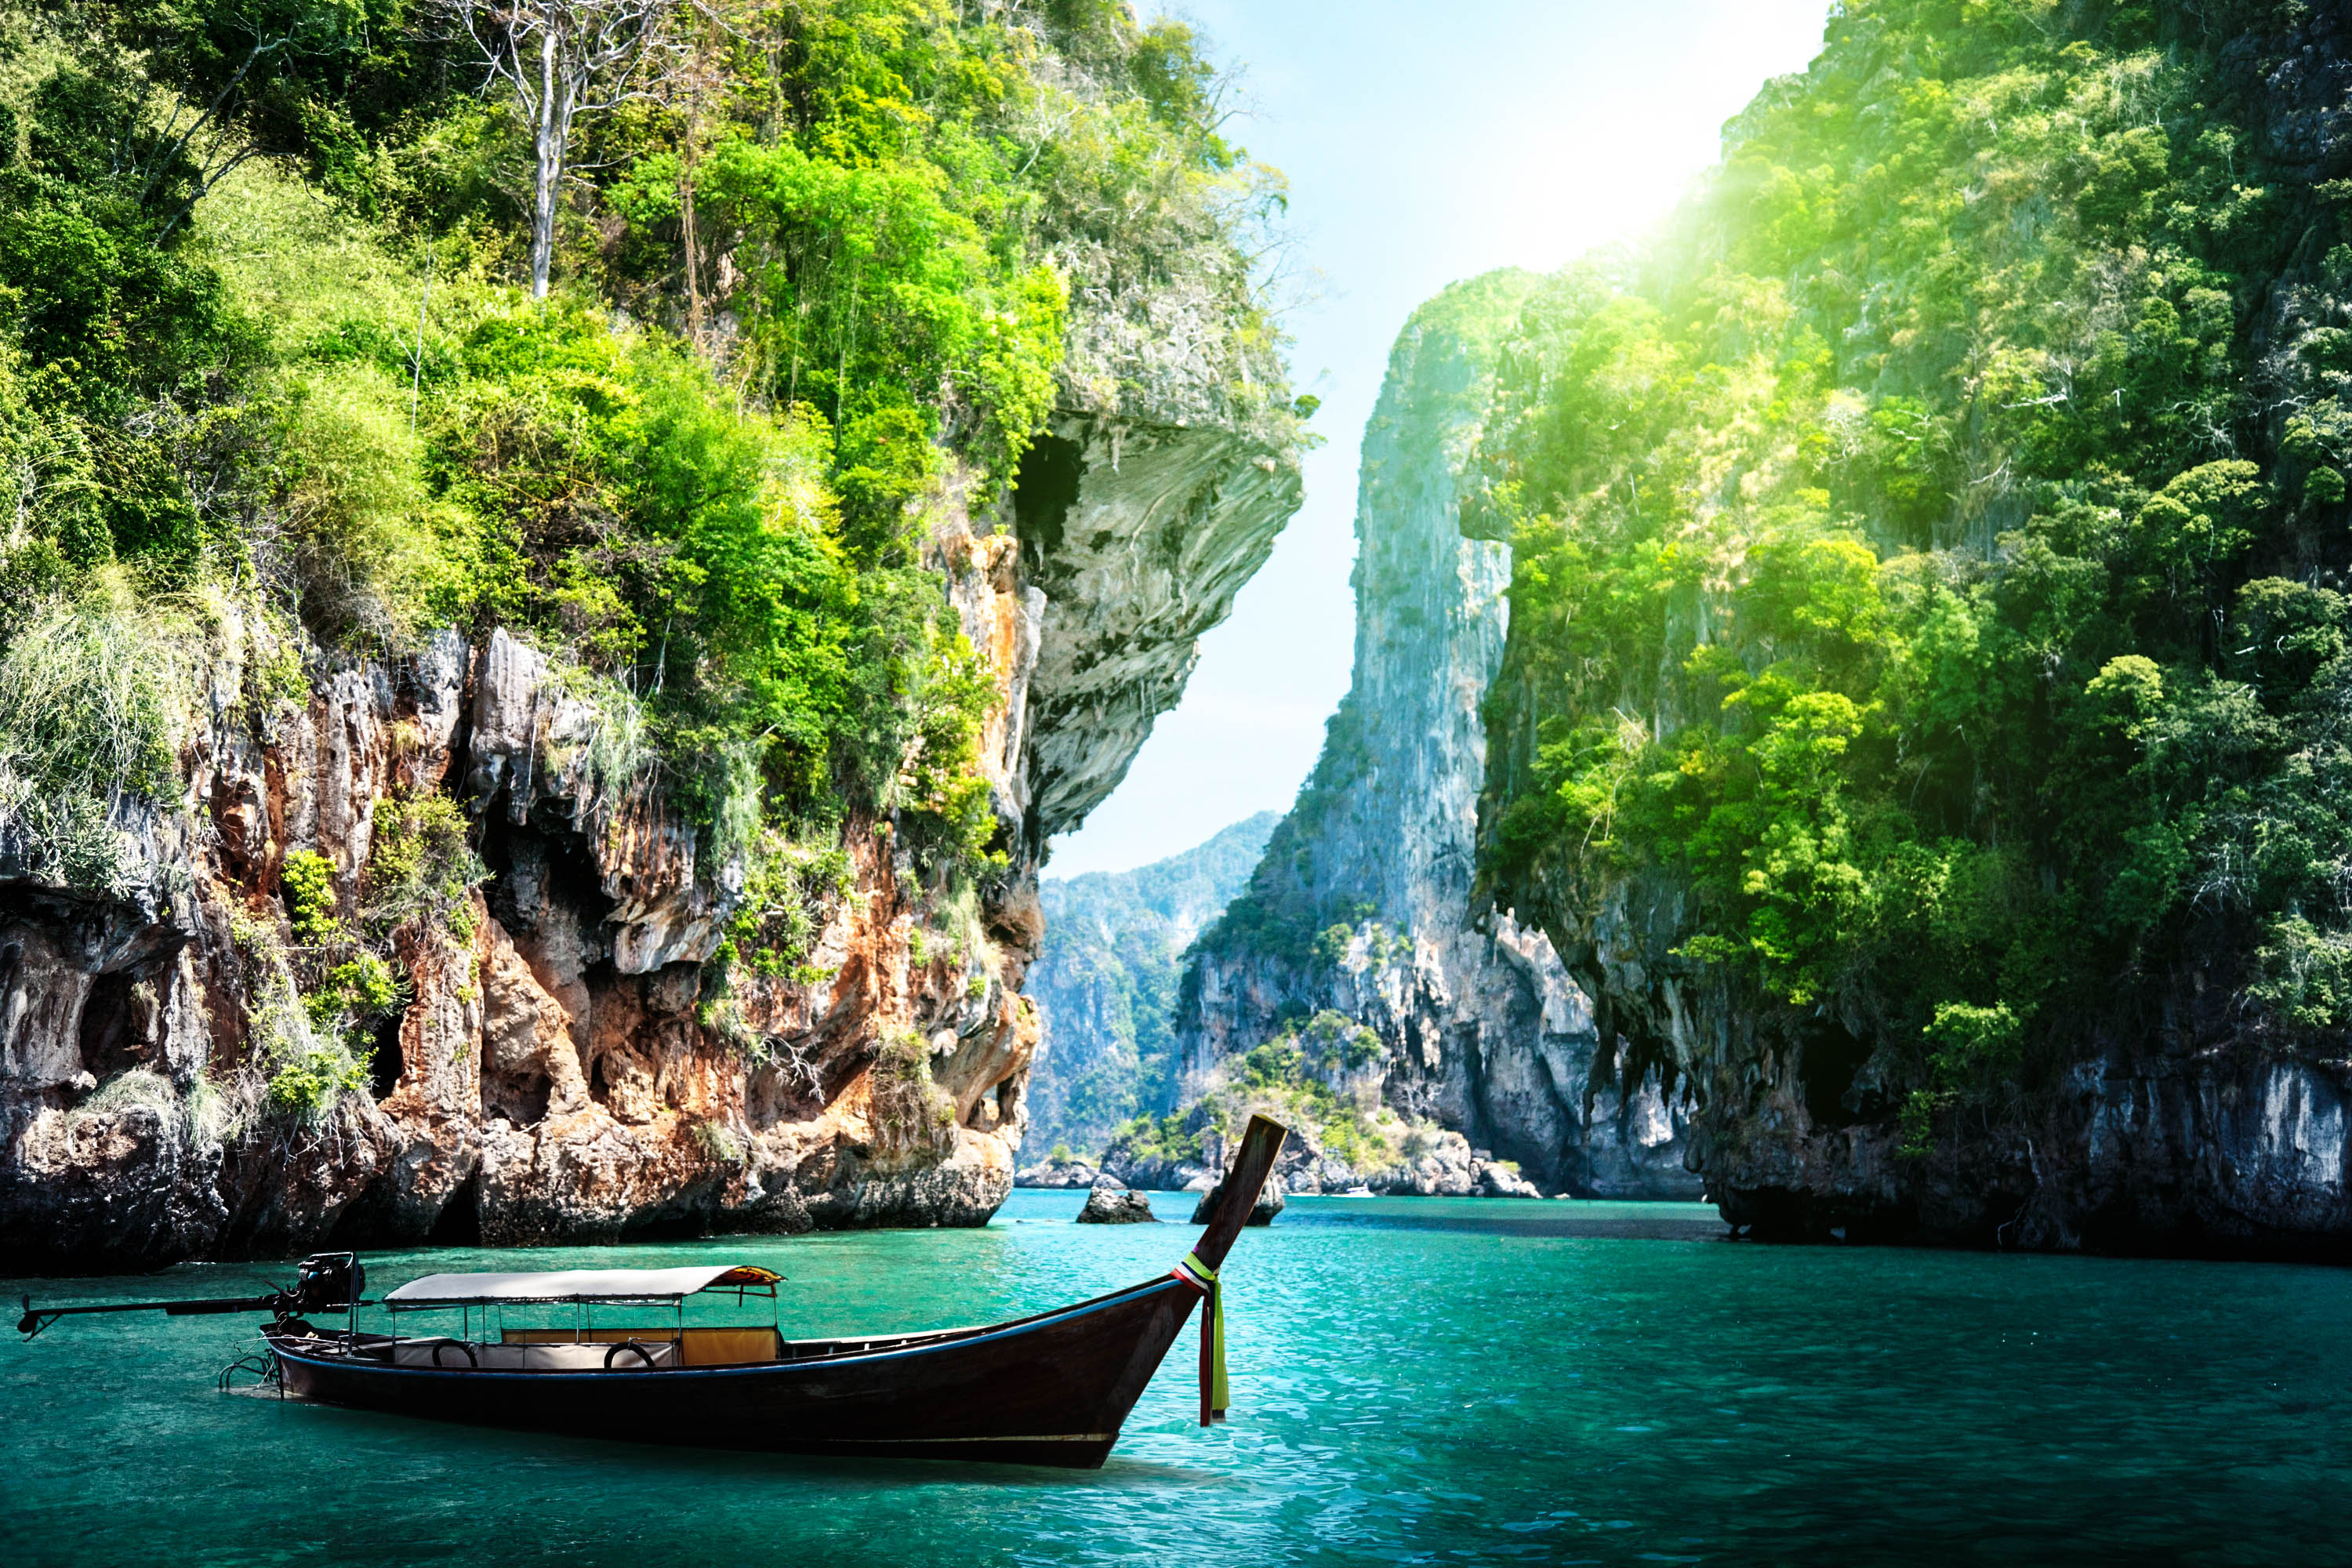 long-boat-and-rocks-on-railay-beach-in-krabi-thailand-shutterstock_125319602-2